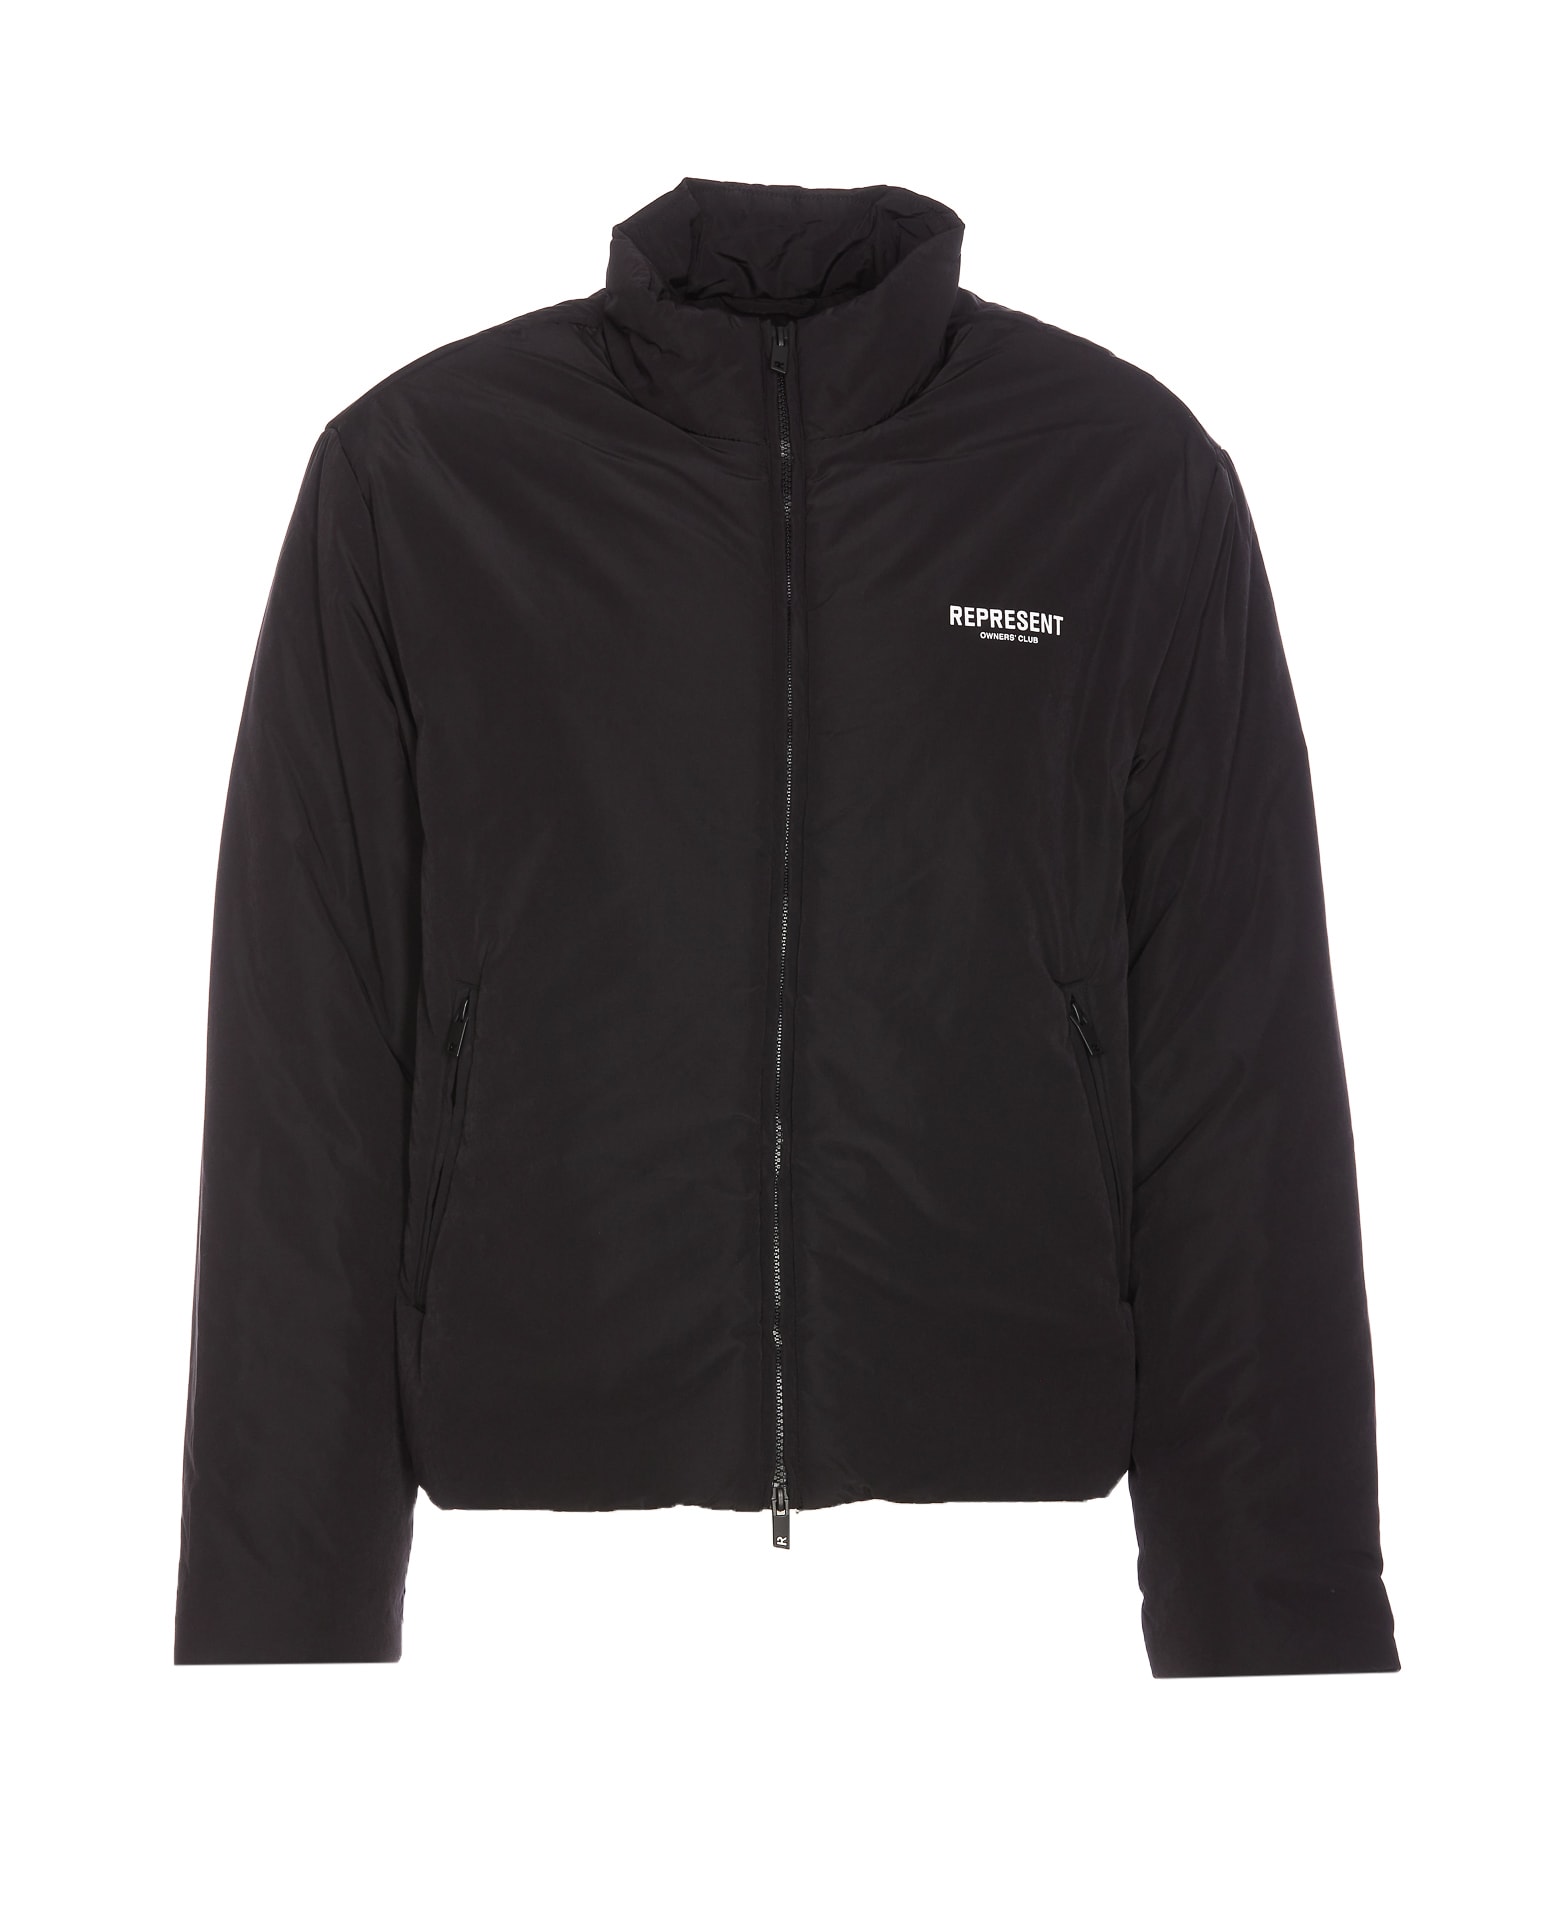 Represent Owners Club Puffer Jacket